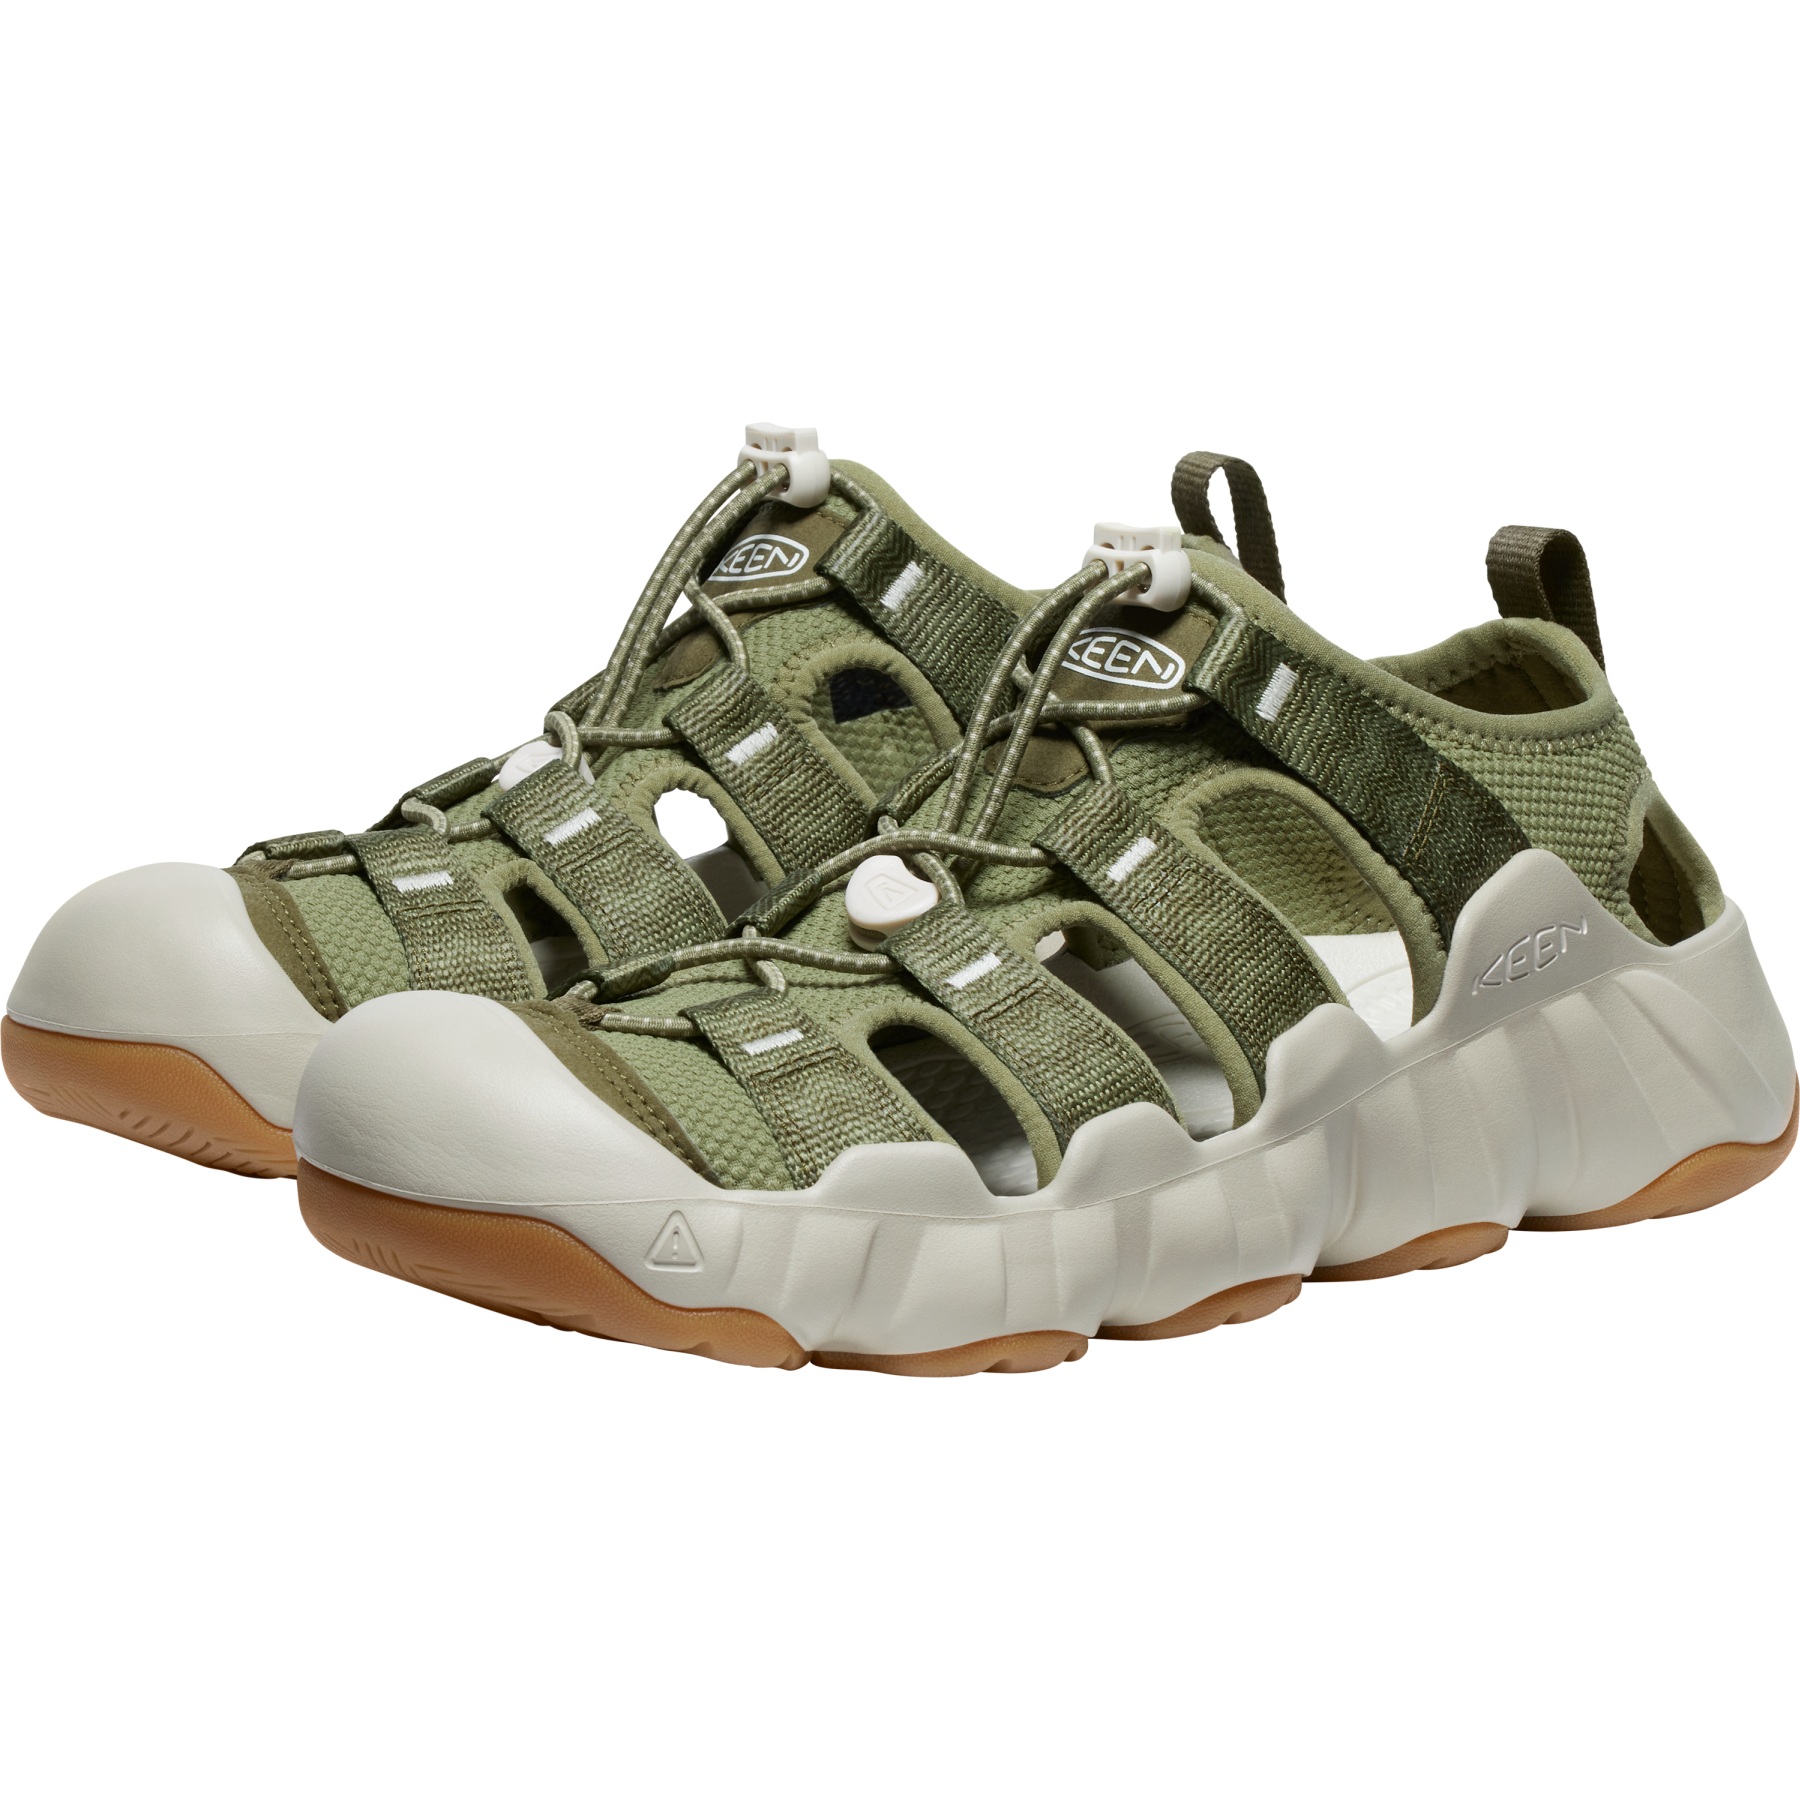 Picture of KEEN Hyperport H2 Sandal Men - Martini Olive/Plaza Taupe